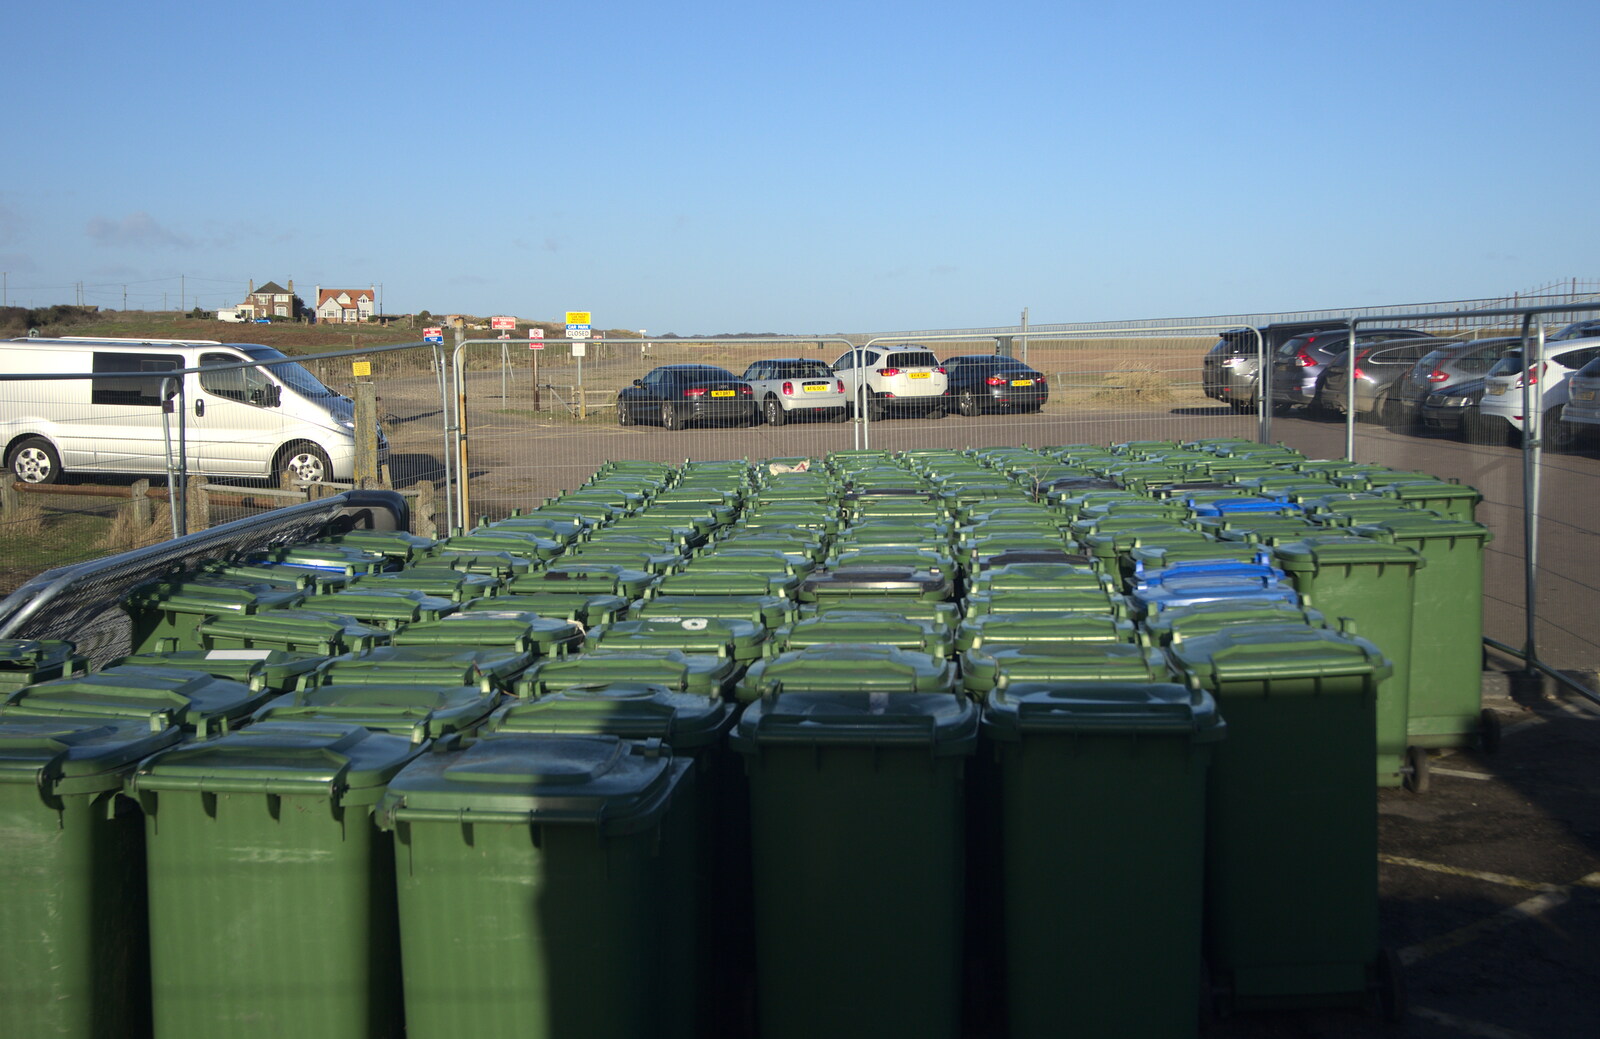 A million wheelie bins at Southwold from Boxing Day in Southwold, Suffolk - 26th December 2016